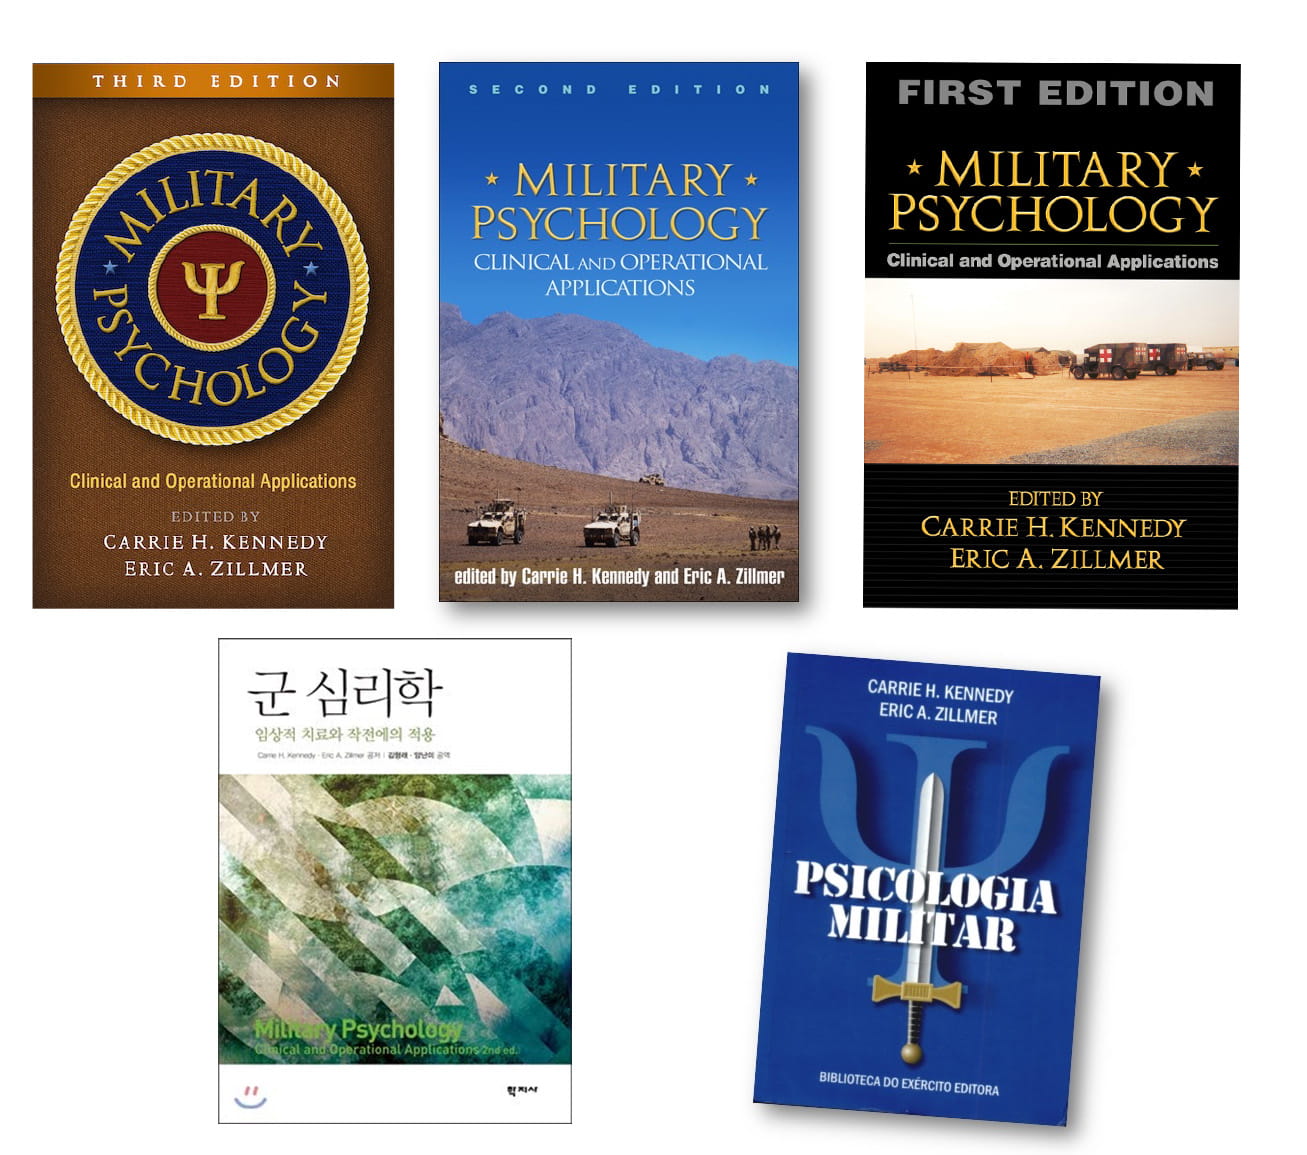 Editions and translations of “Military Psychology,” including, clockwise from top left, the third edition, the second edition and the first edition, and then the Portuguese and South Korean editions. Photos courtesy Eric Zillmer.